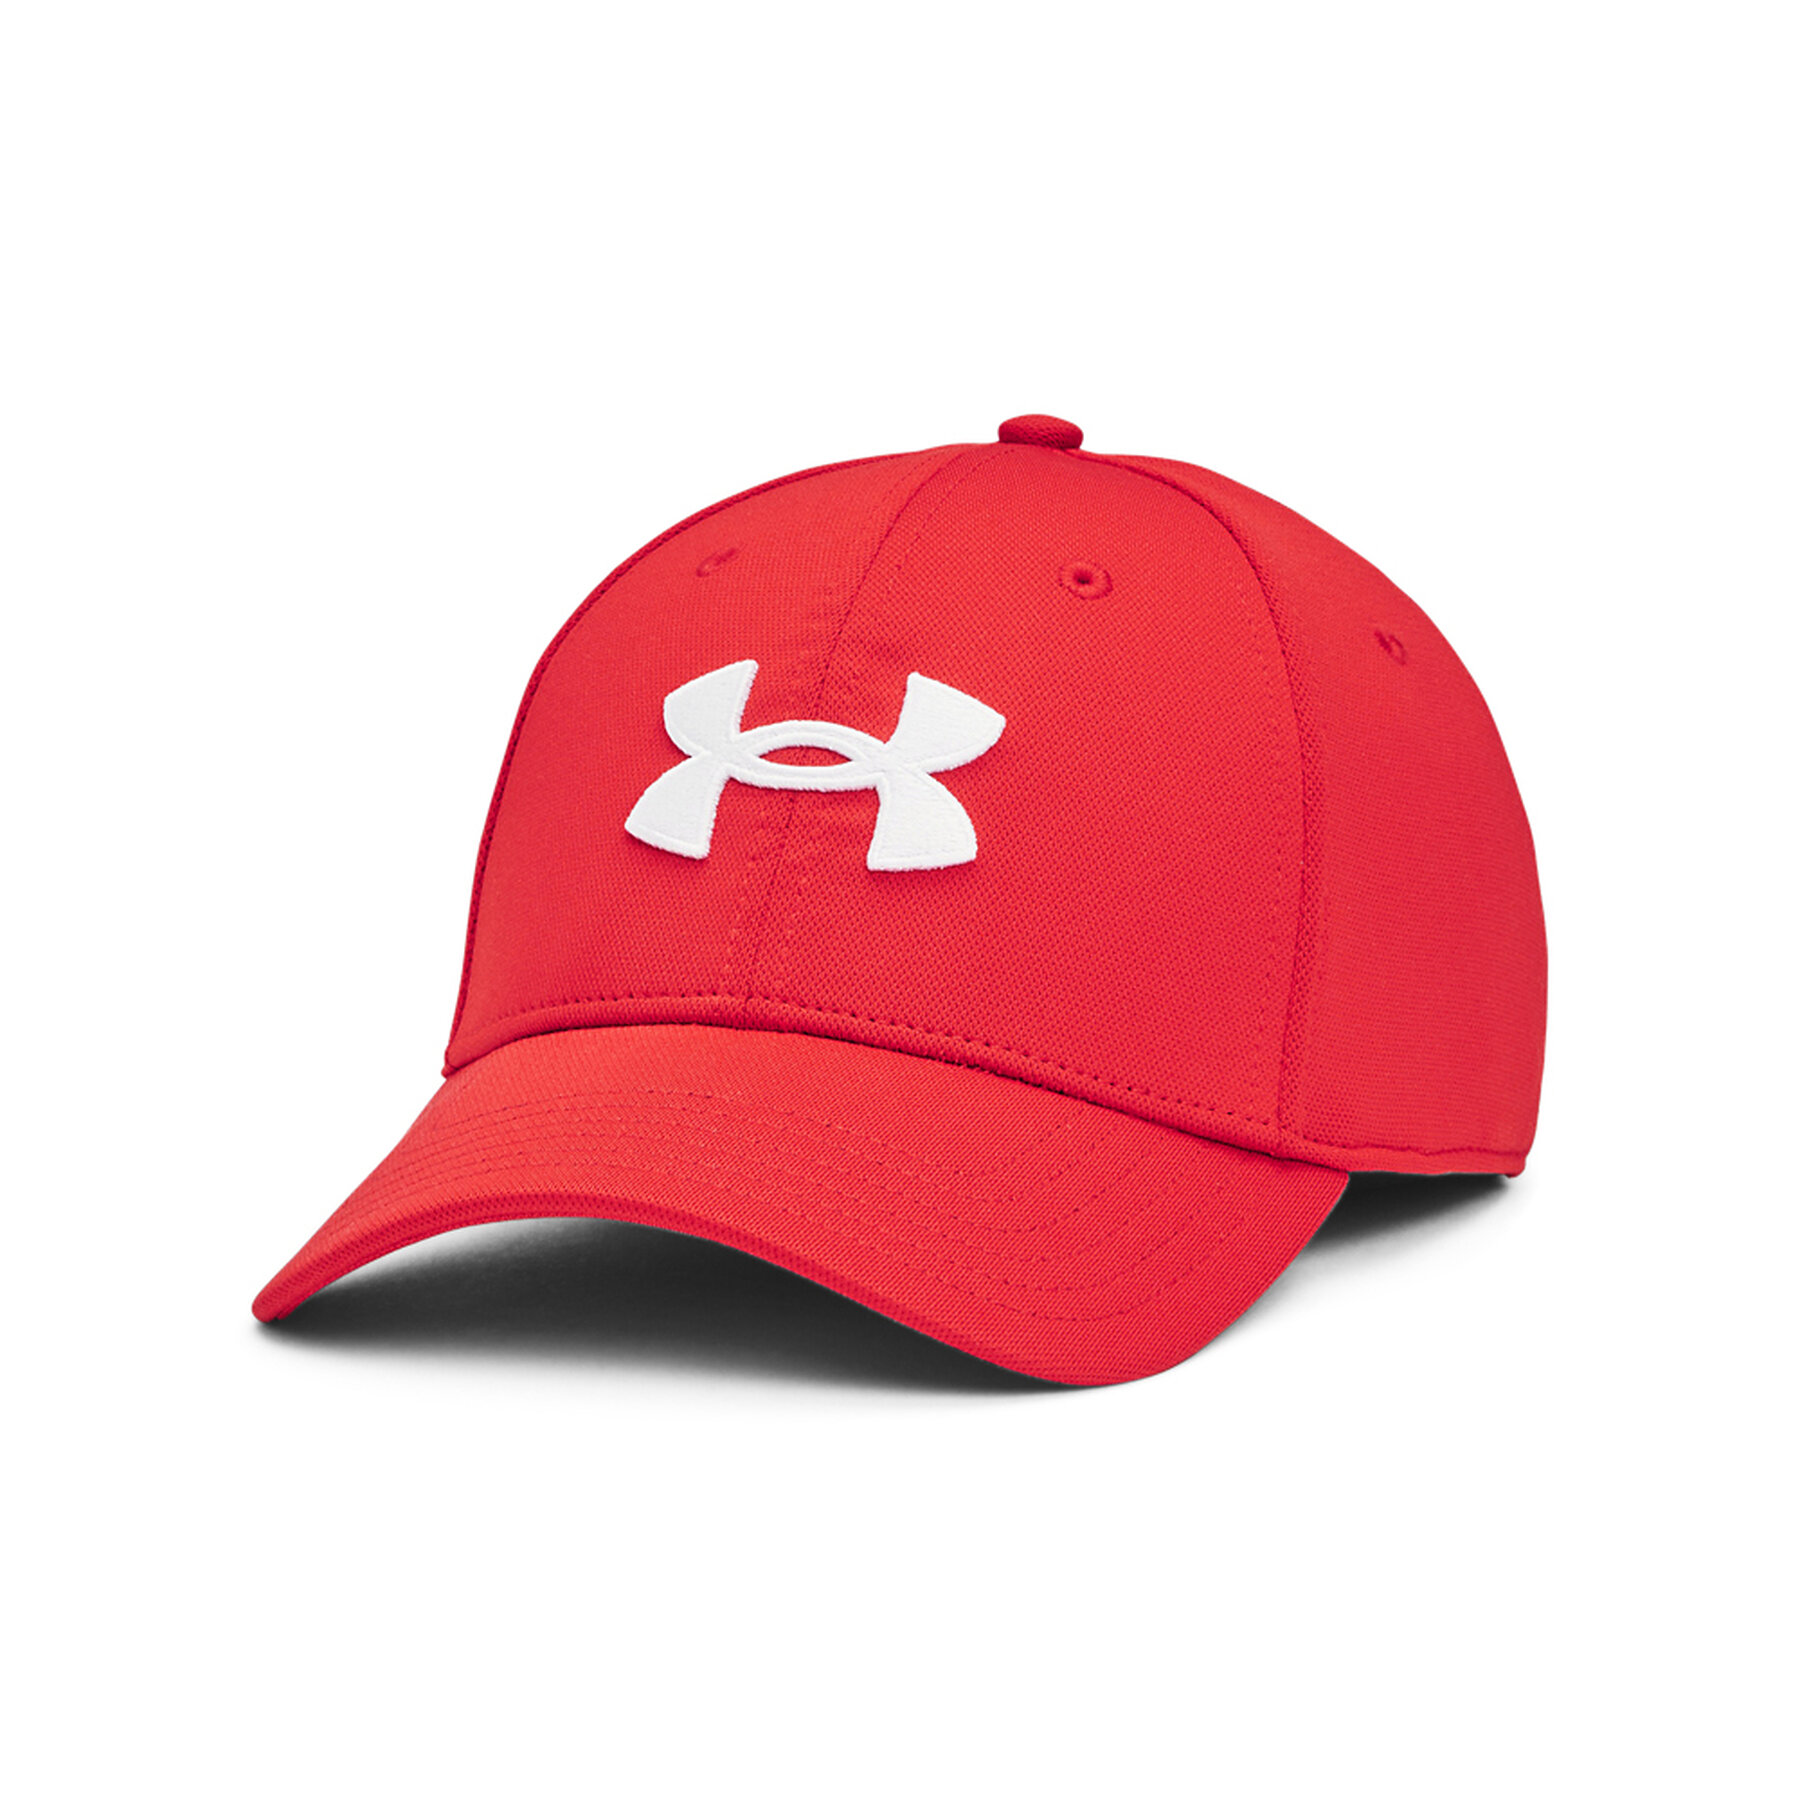 Šilterica Under Armour Men's UA Blitzing 1376700-600 Red/White